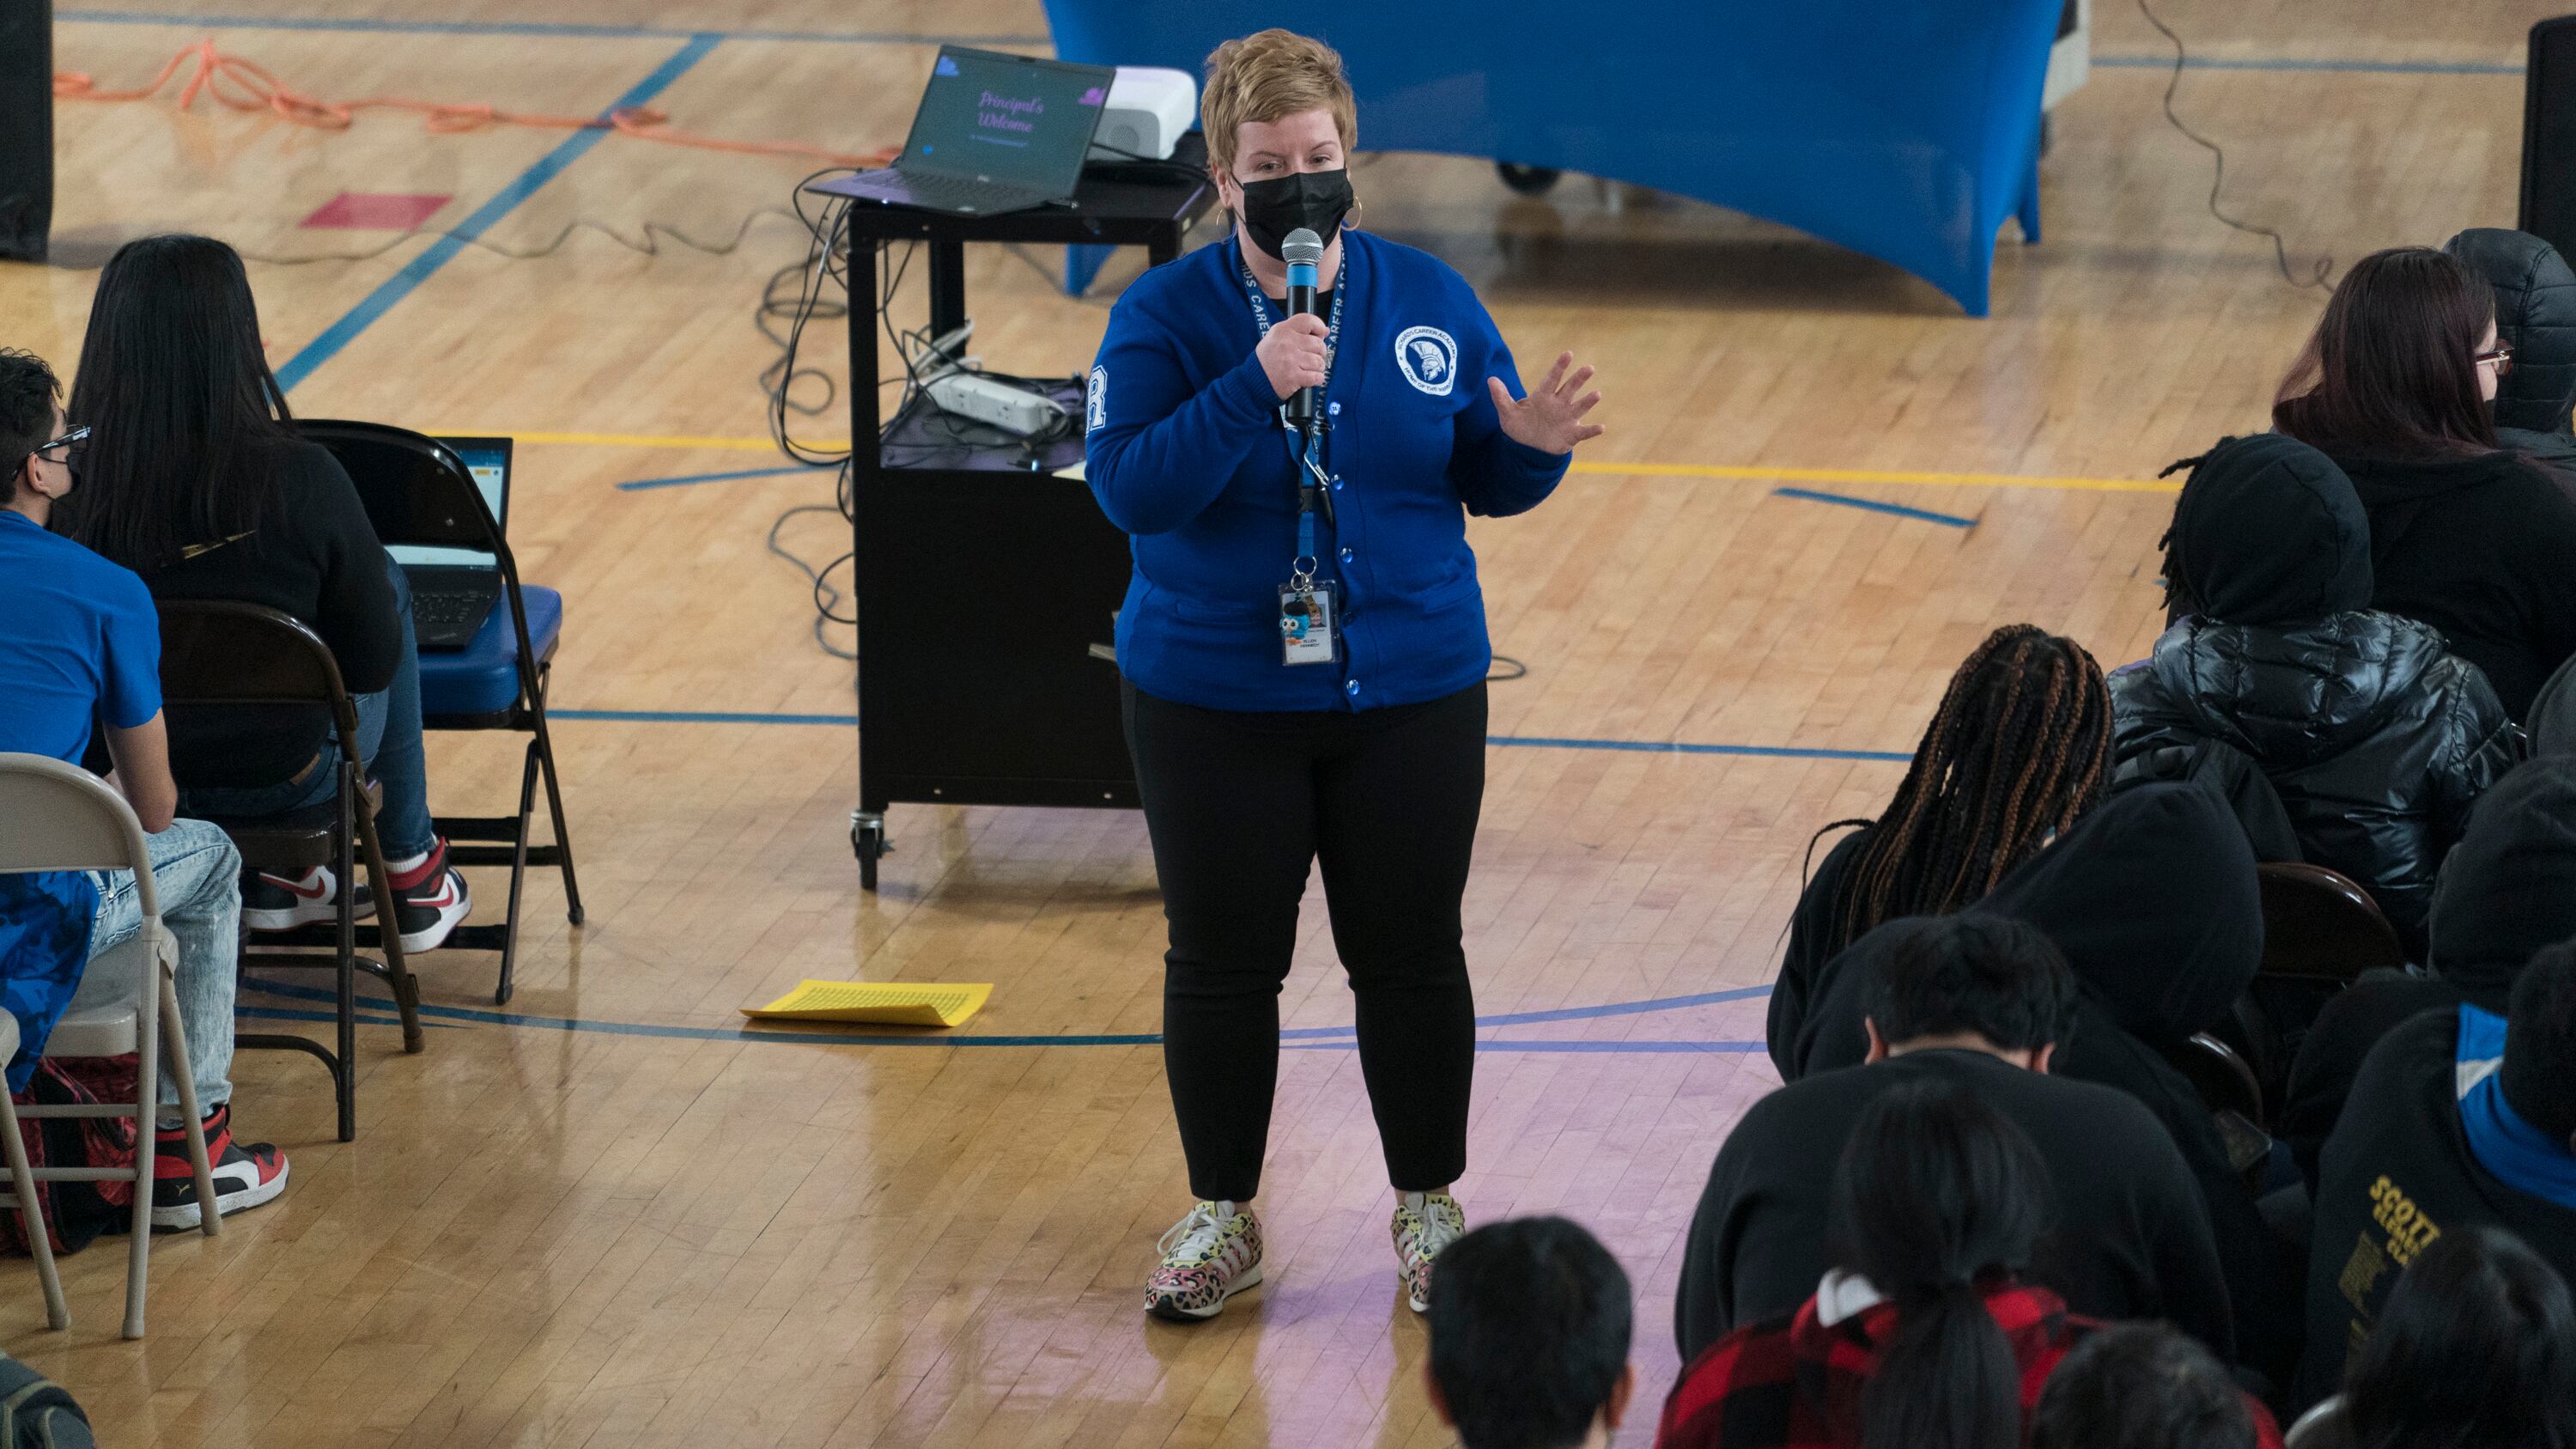 A school principal wearing a blue top and black pants addresses her students during an assembly in a high school gymnasium.